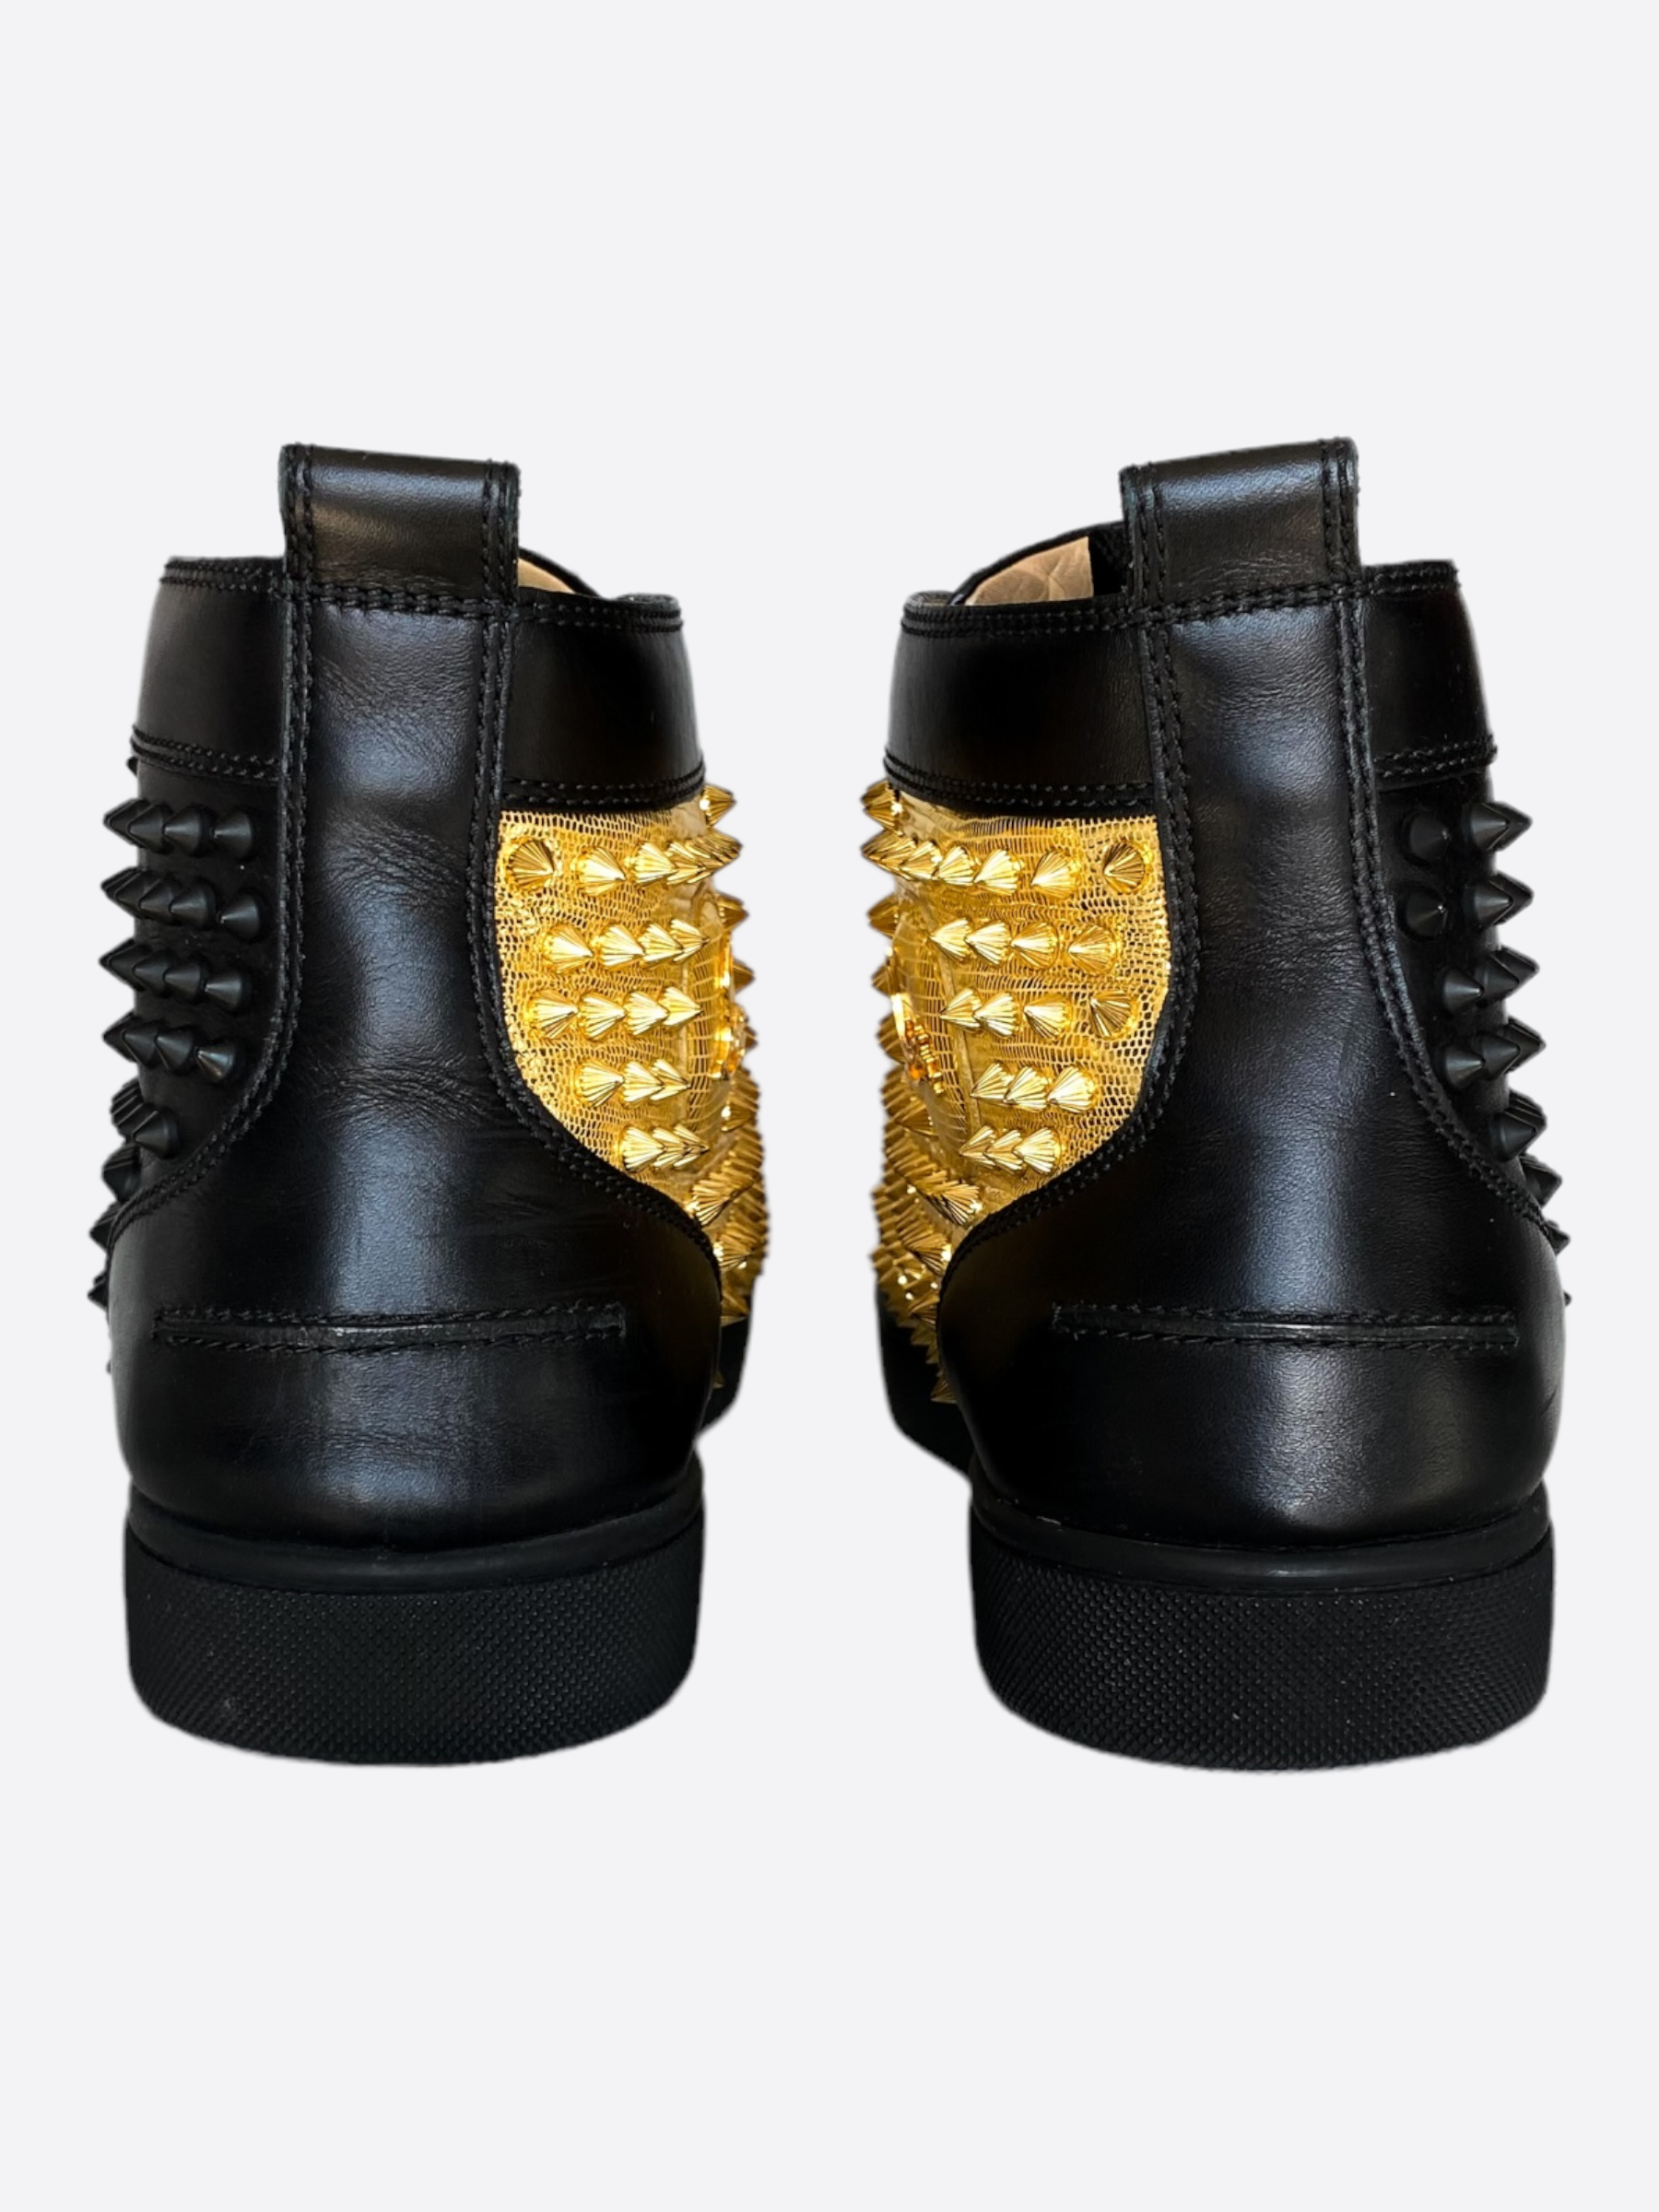 High Top Black Diamond Gold Nails Real Leather Red Bottom Shoes